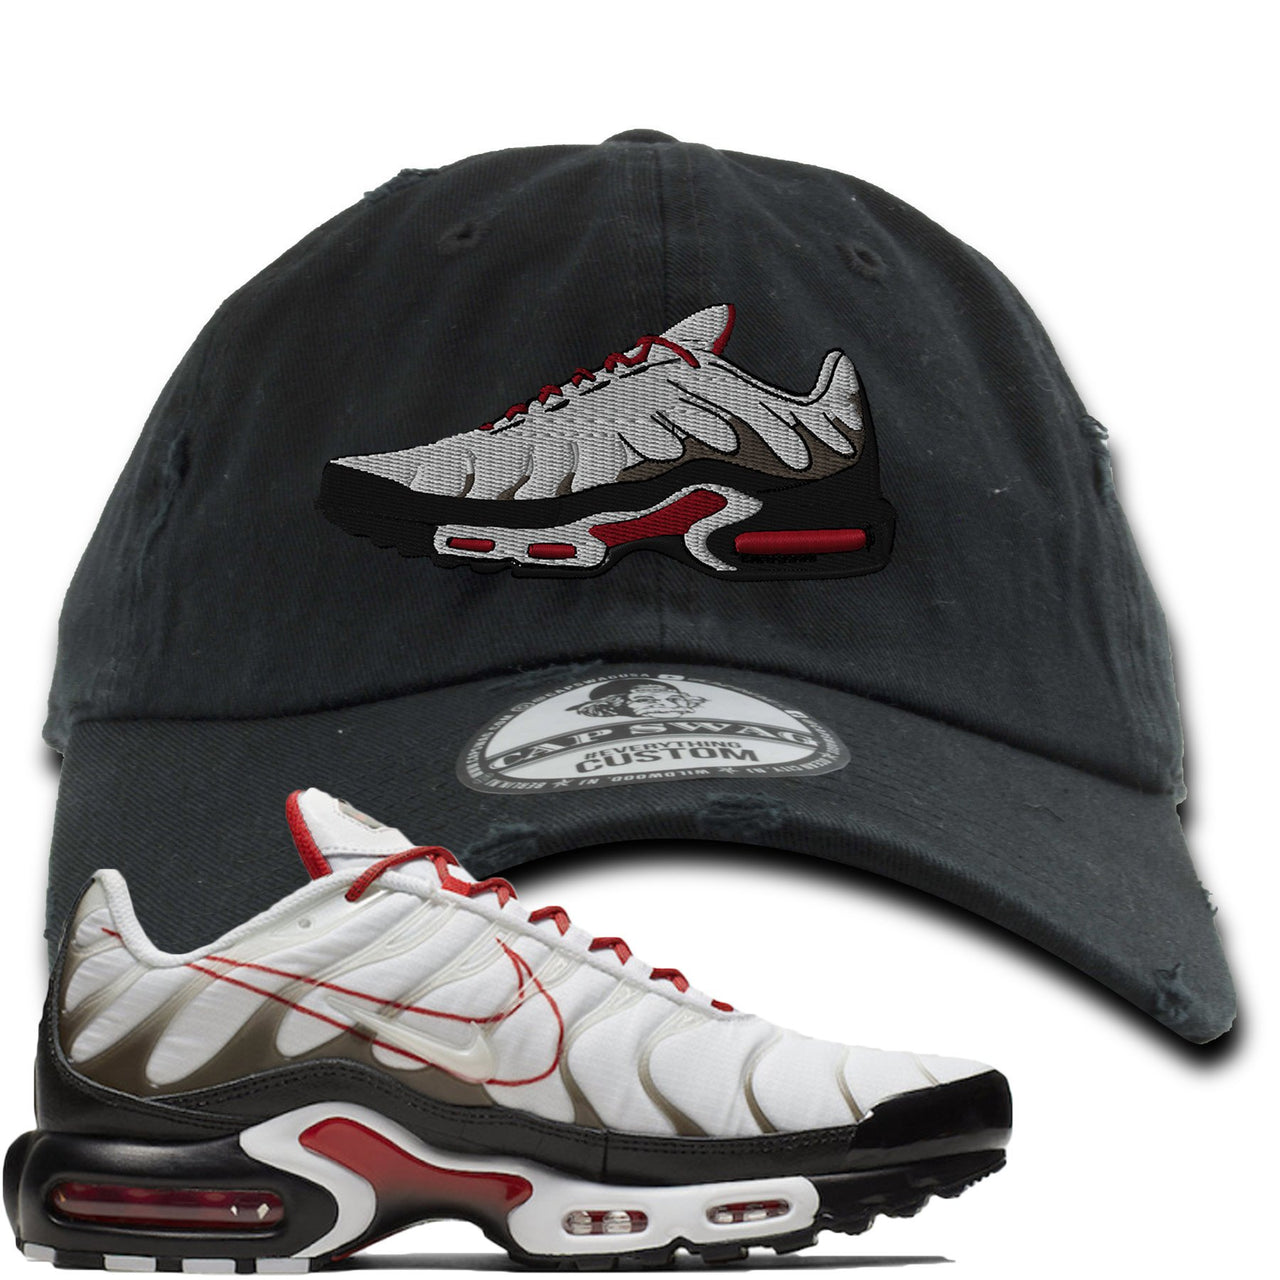 White University Red Pluses Distressed Dad Hat | Shoe, Black